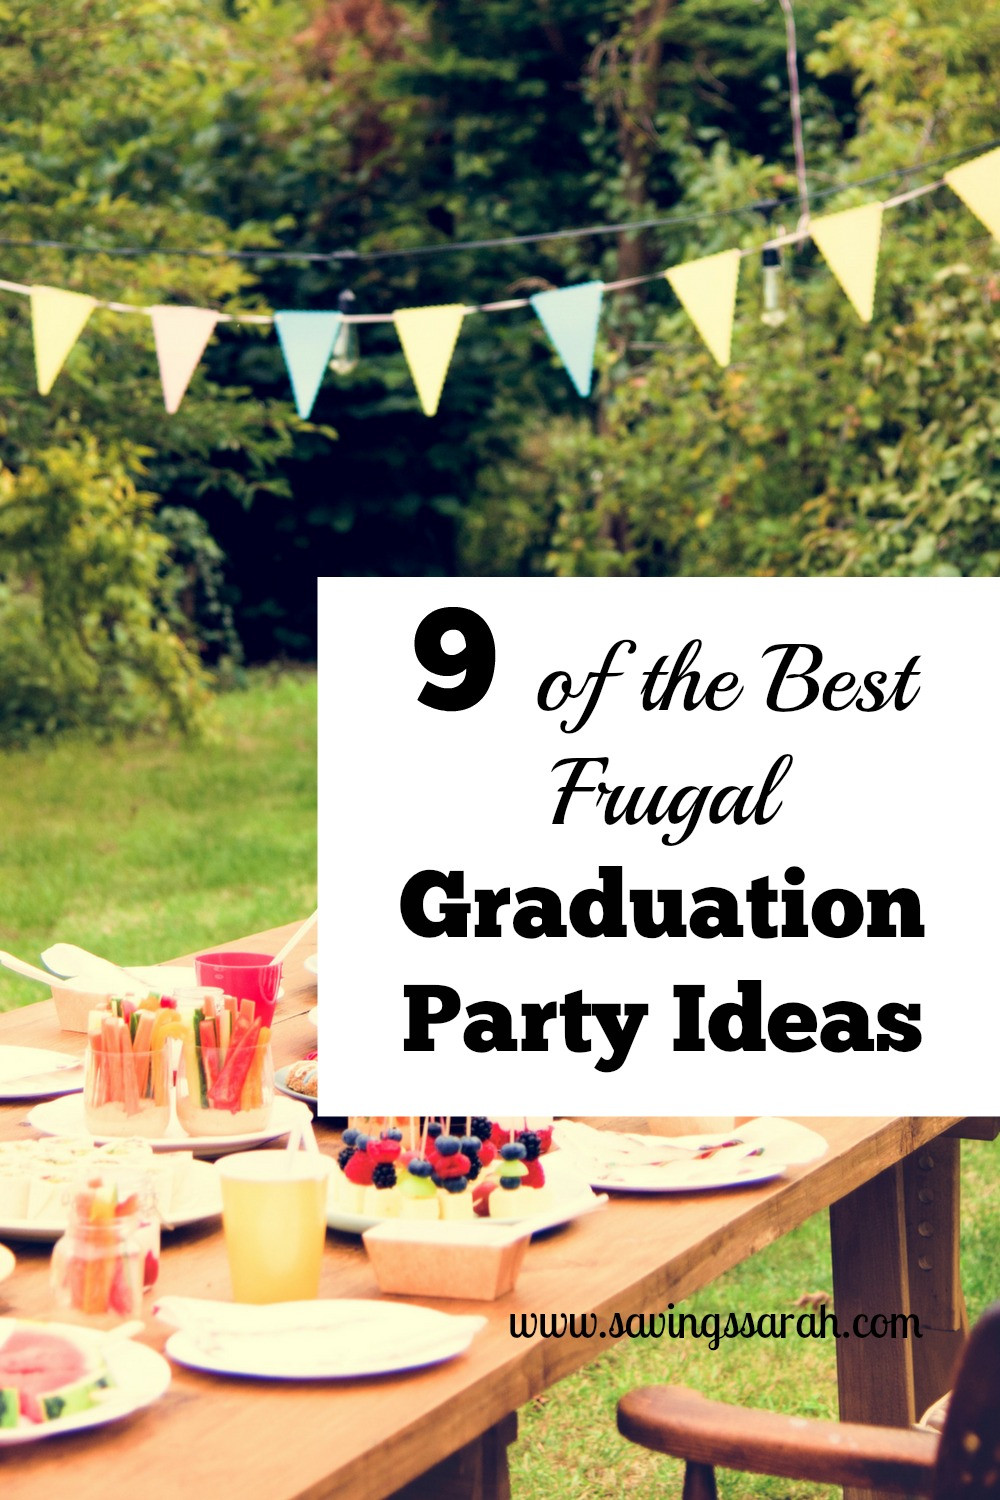 Graduation Party Themes Ideas
 9 the Best Frugal Graduation Party Ideas Earning and